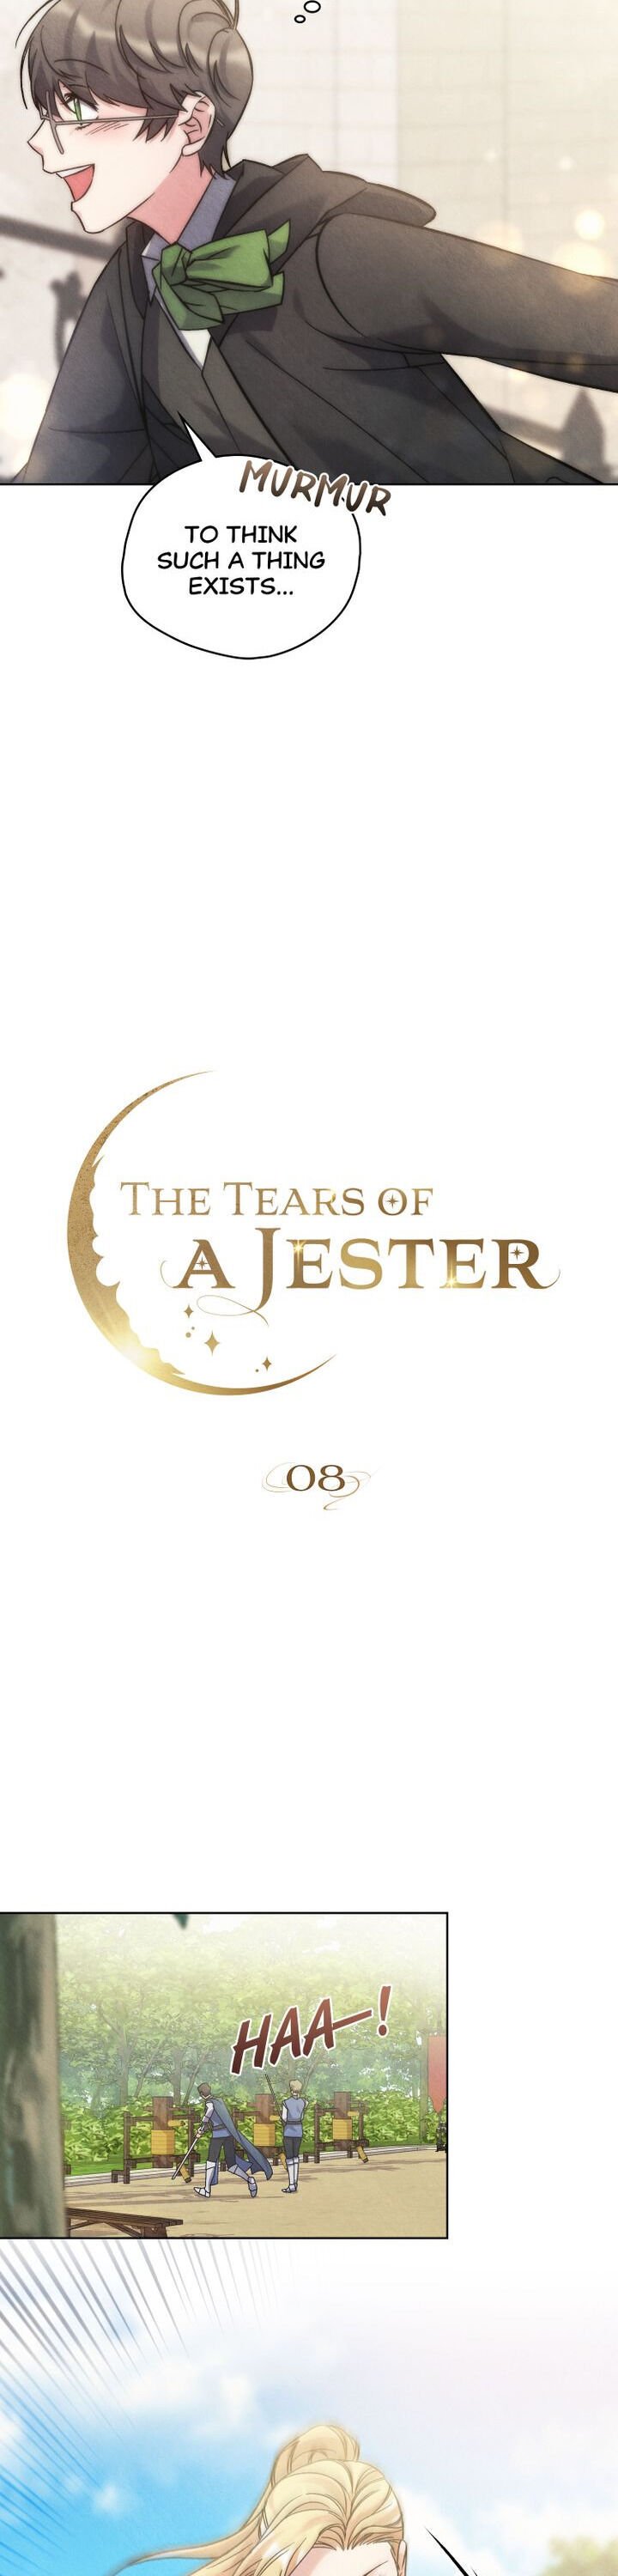 The Tears of a Jester chapter 8